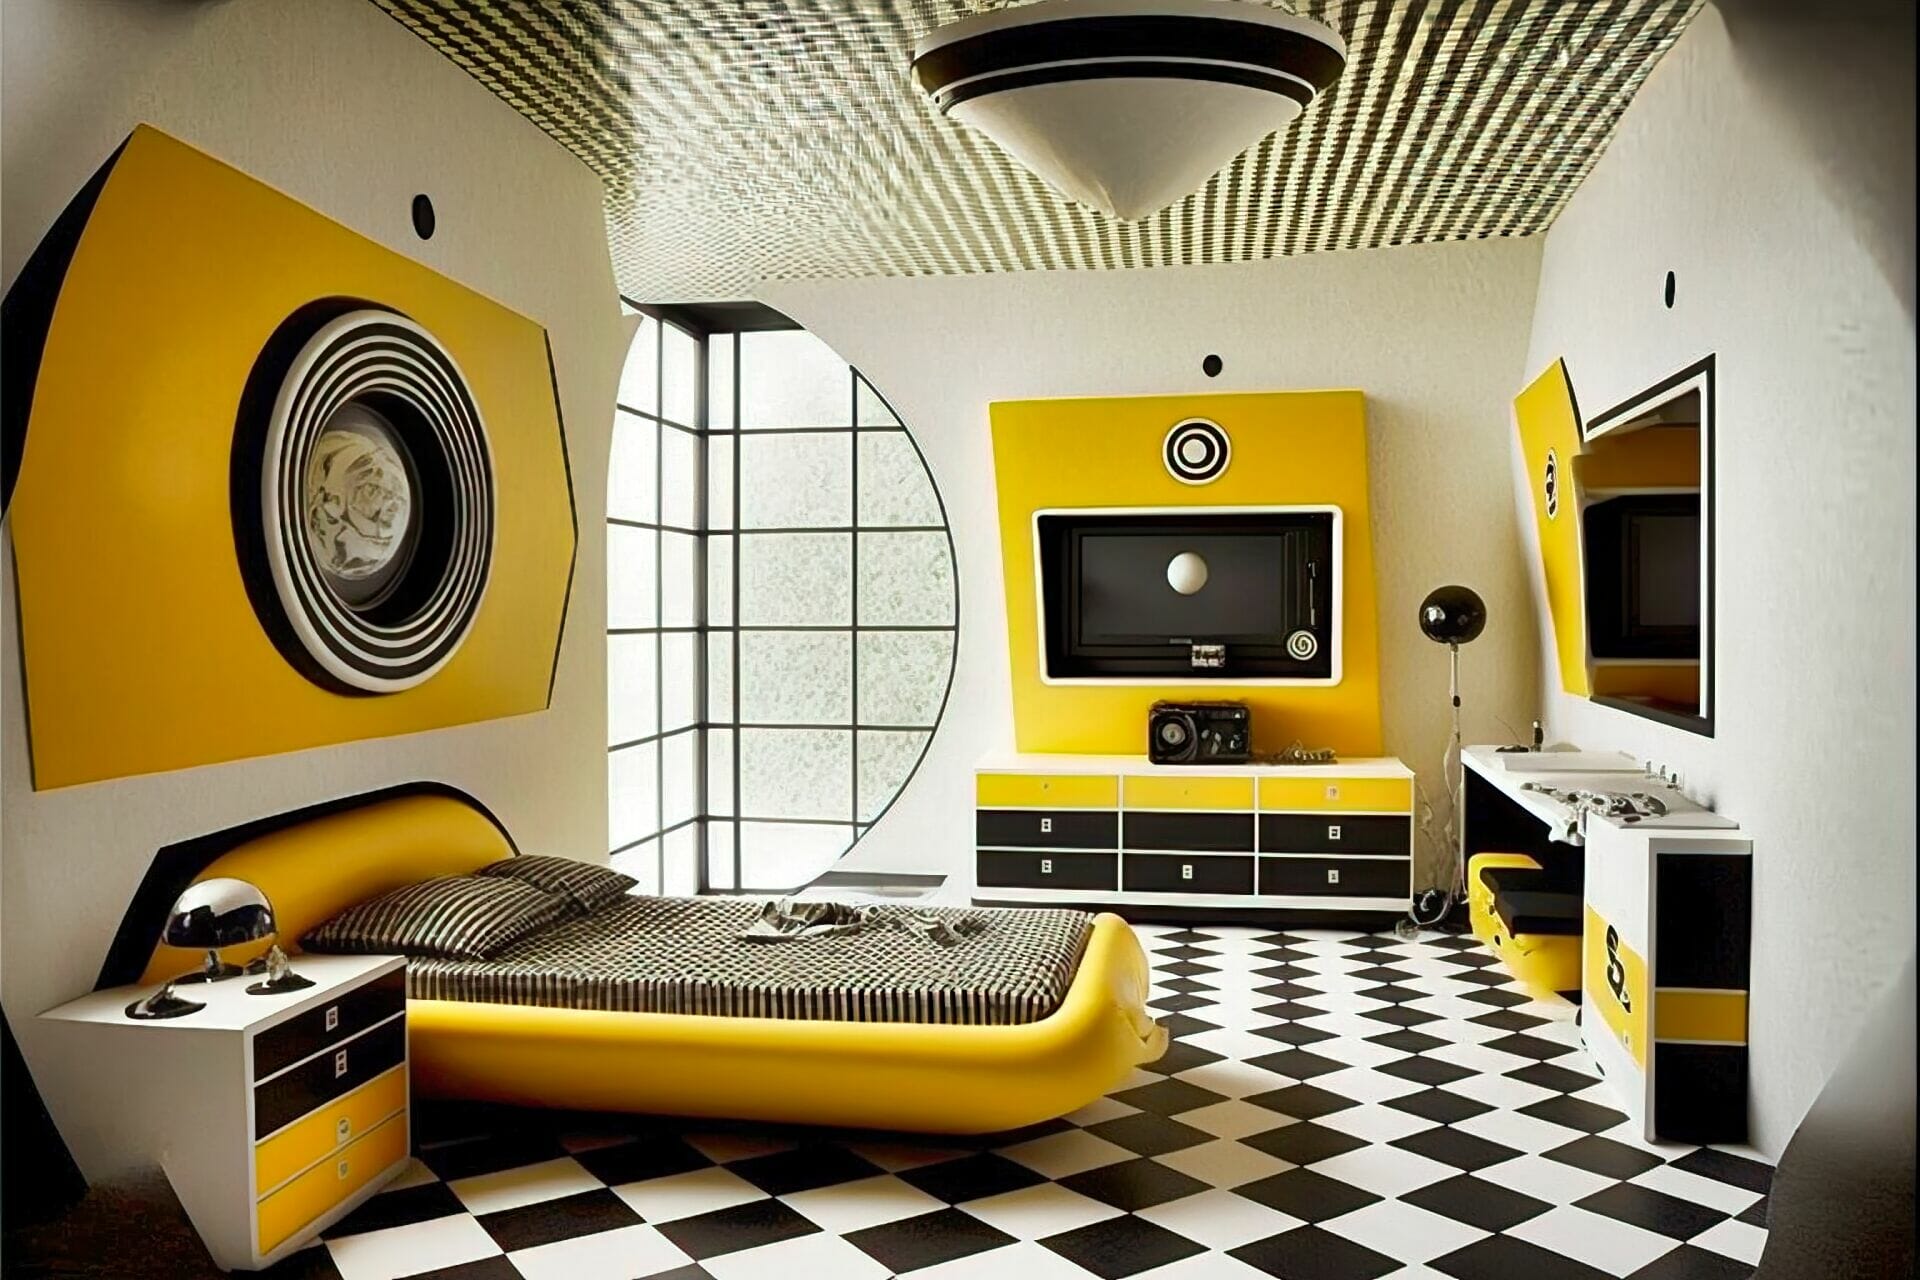 Futuristic Style Bedroom With A Vintage Feel: This Bedroom Features A Fun And Unique Combination Of Vintage And Futuristic Elements. The Walls And Ceiling Are Painted A Bright Yellow, And The Floor Is Made Up Of Checkered Black And White Tiles. A Variety Of Vintage Furniture Pieces And Accents Add To The Look.